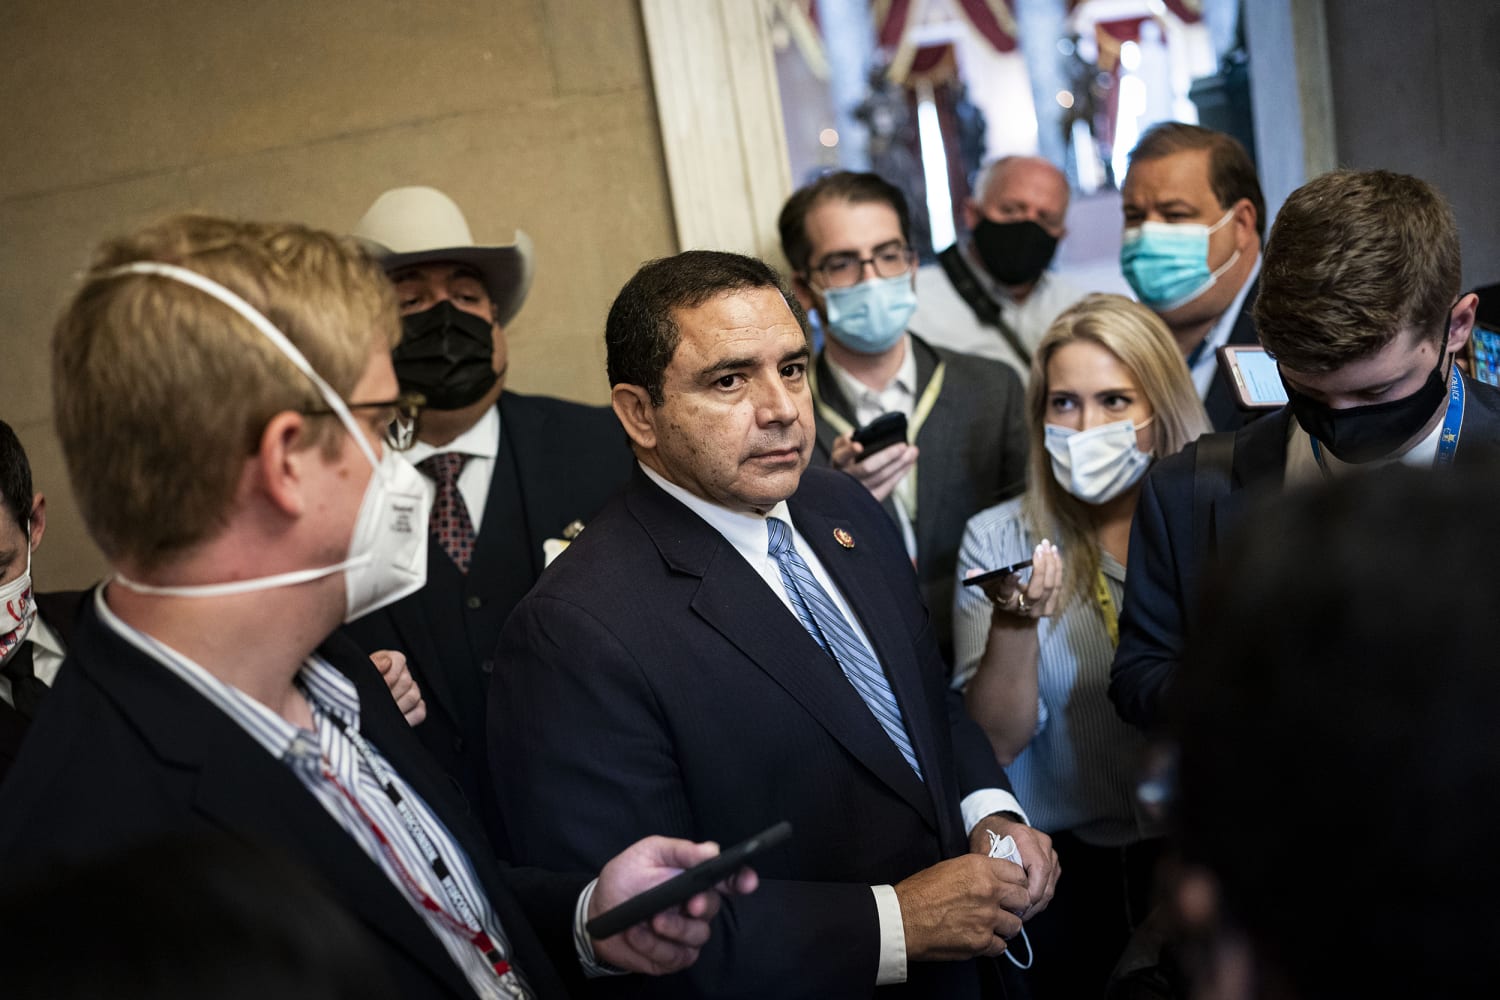 Rep. Henry Cuellar says he'll  'cooperate with any' probe amid reports of FBI raid at Texas home